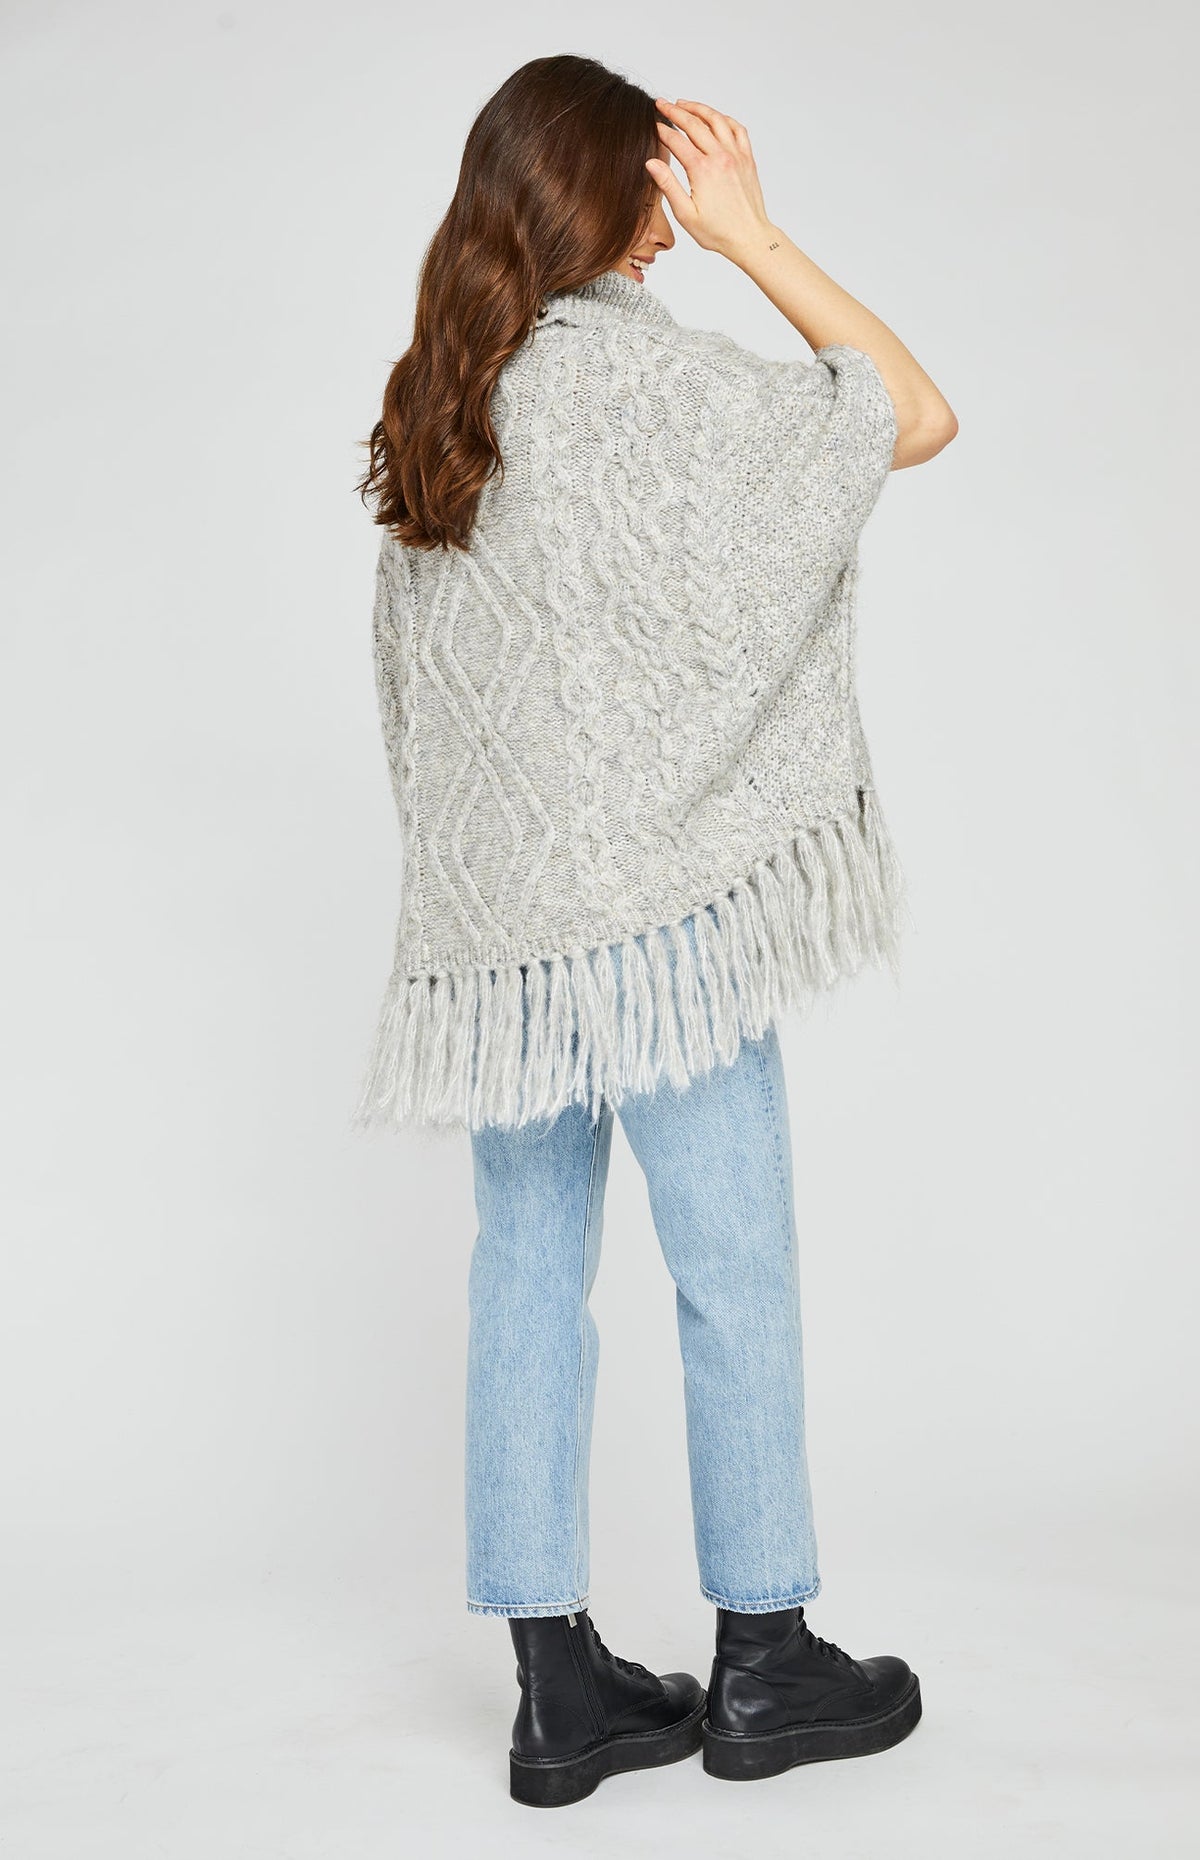 Gentle Fawn Kindred Poncho